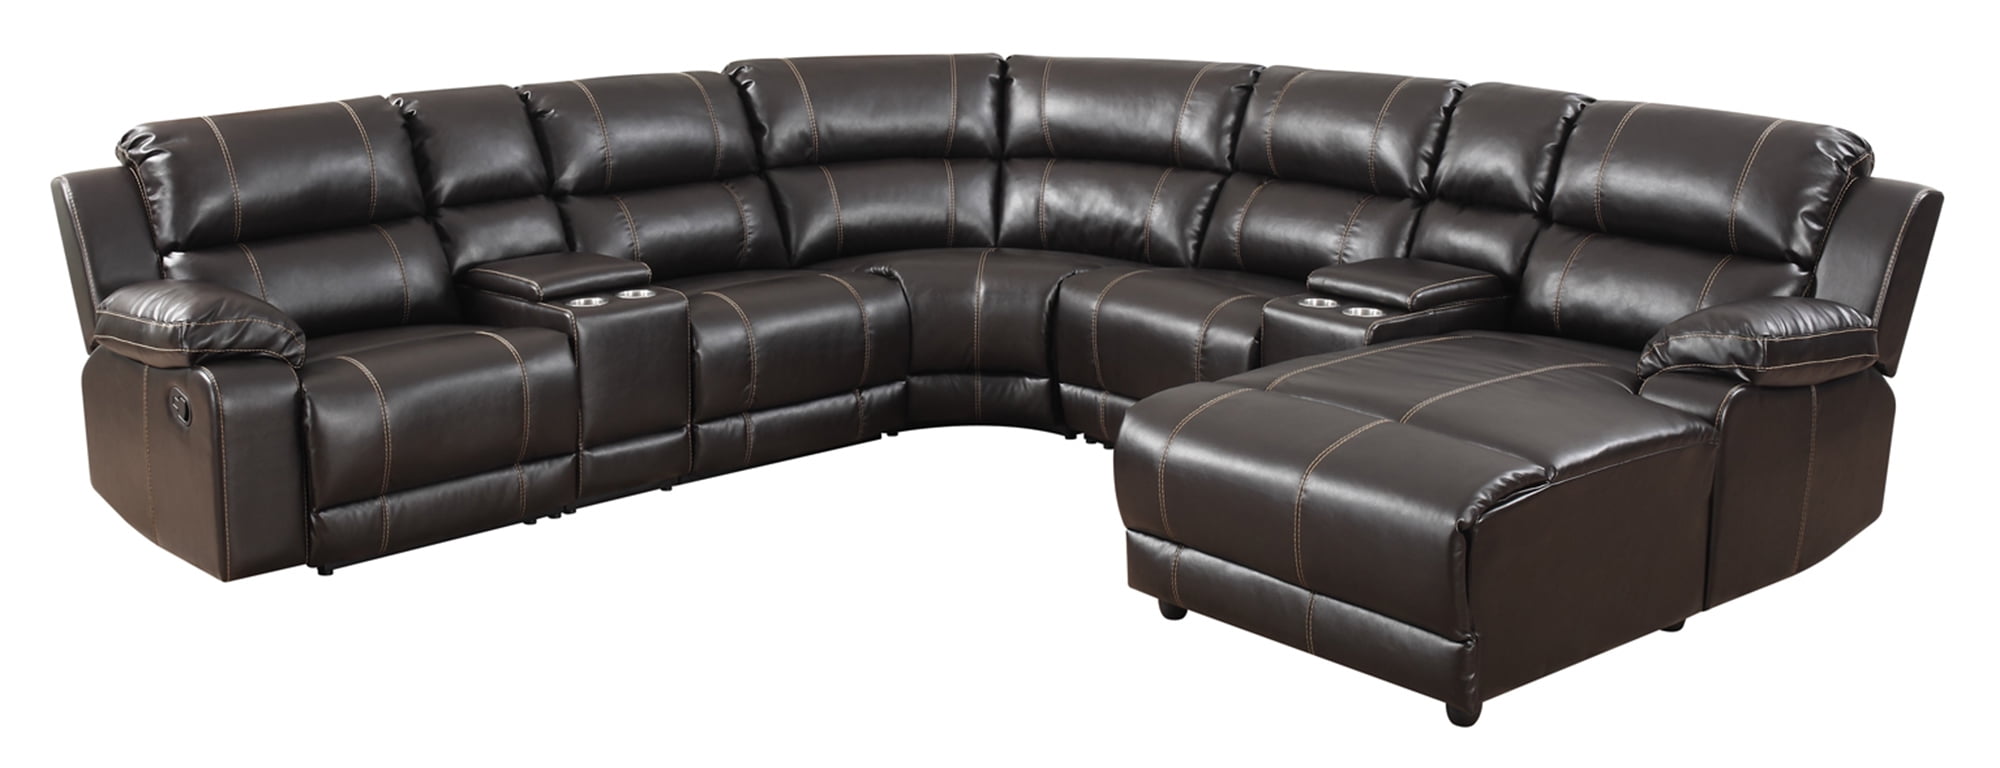 leather sectional recliner sofa set